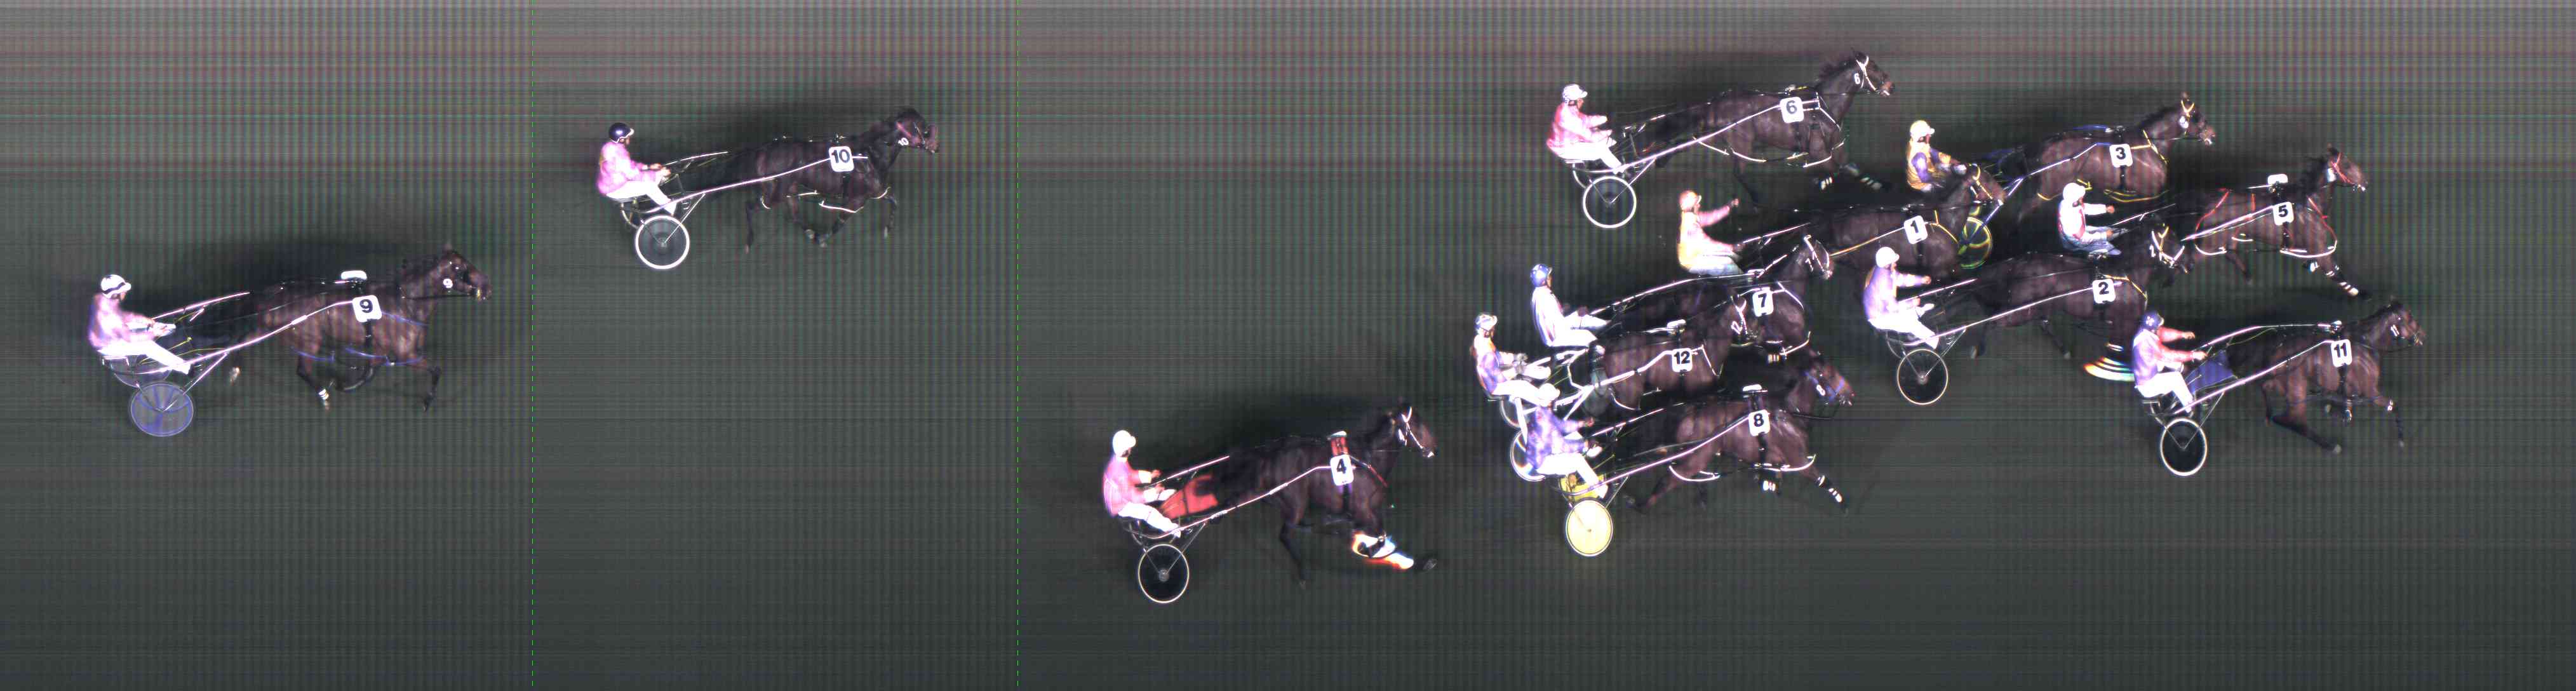 Photo Finish Pictures and Video Race Replays Supplied and Updated on the Website by CFM Technology